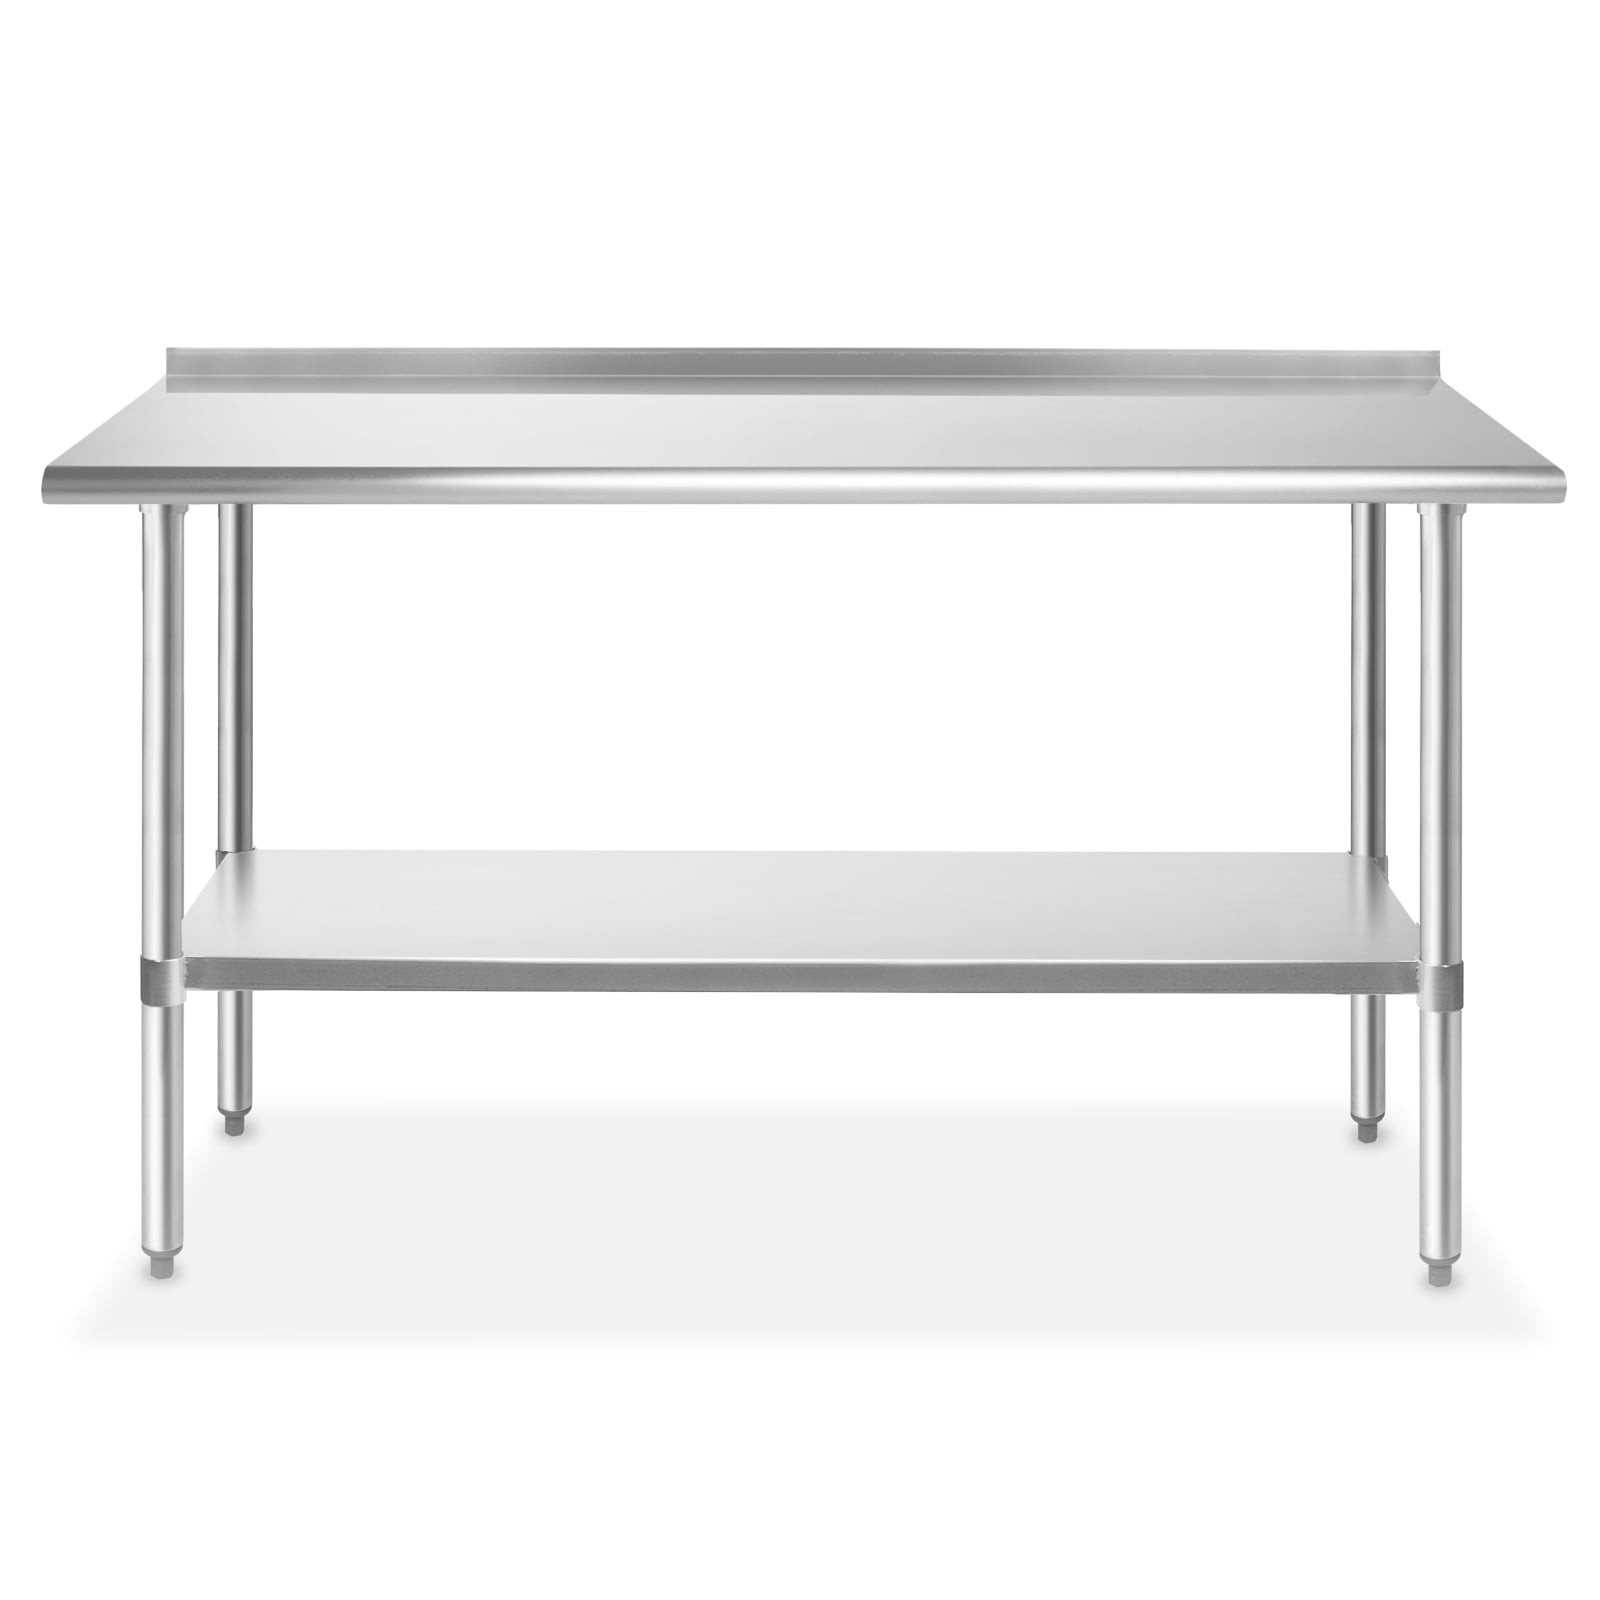 NSF Stainless Steel Commercial Kitchen Prep & Work Table with